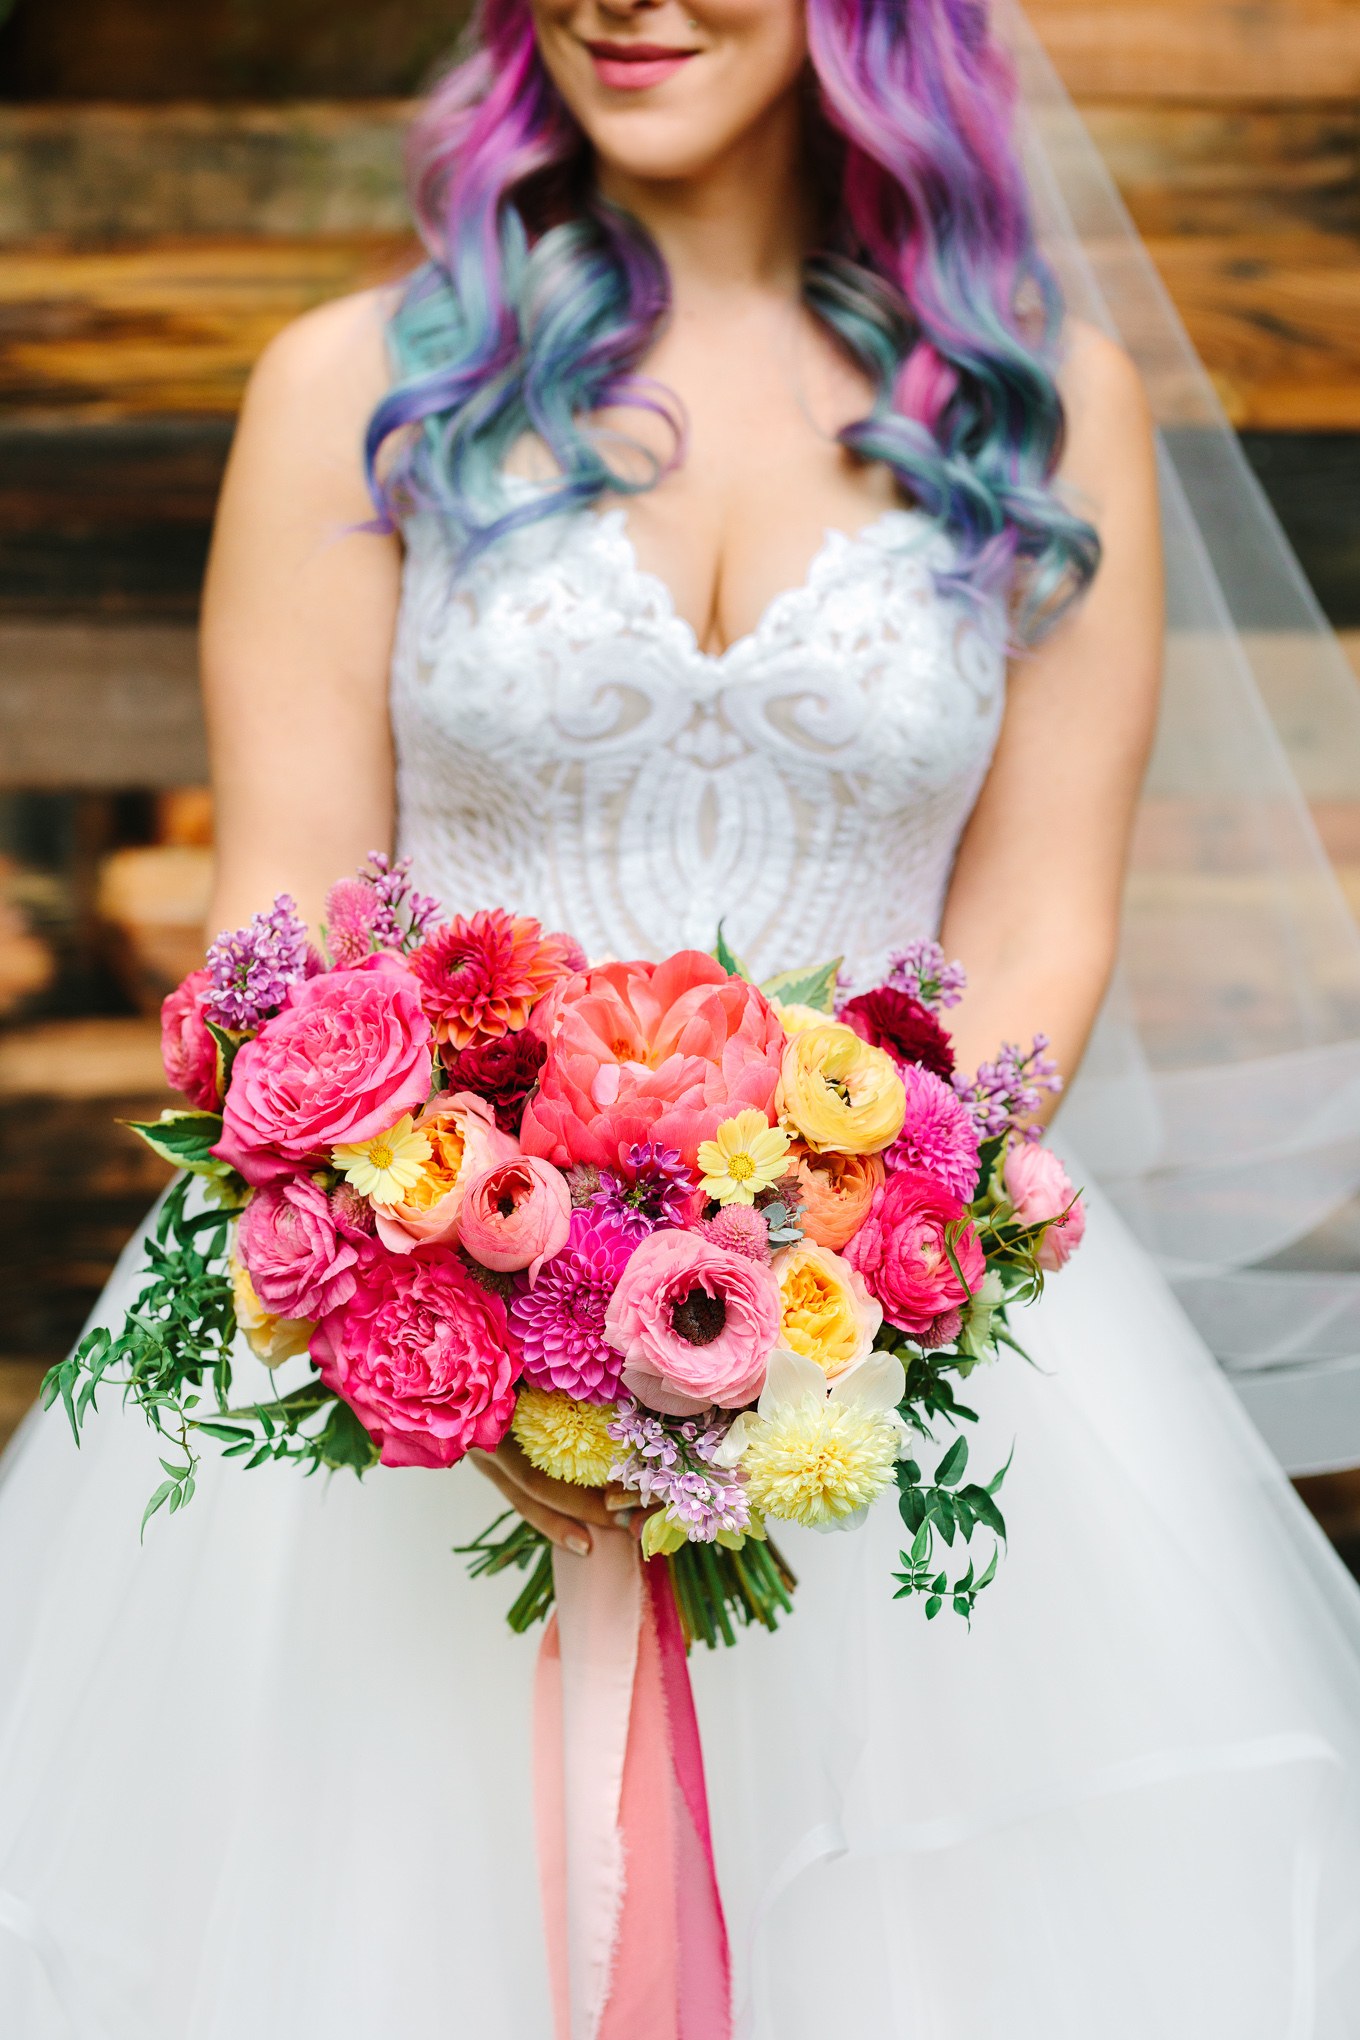 Colorful wedding flowers and bridal unicorn hair | Beautiful bridal bouquet inspiration and advice | Colorful and elevated wedding photography for fun-loving couples in Southern California | #weddingflowers #weddingbouquet #bridebouquet #bouquetideas #uniquebouquet   Source: Mary Costa Photography | Los Angeles